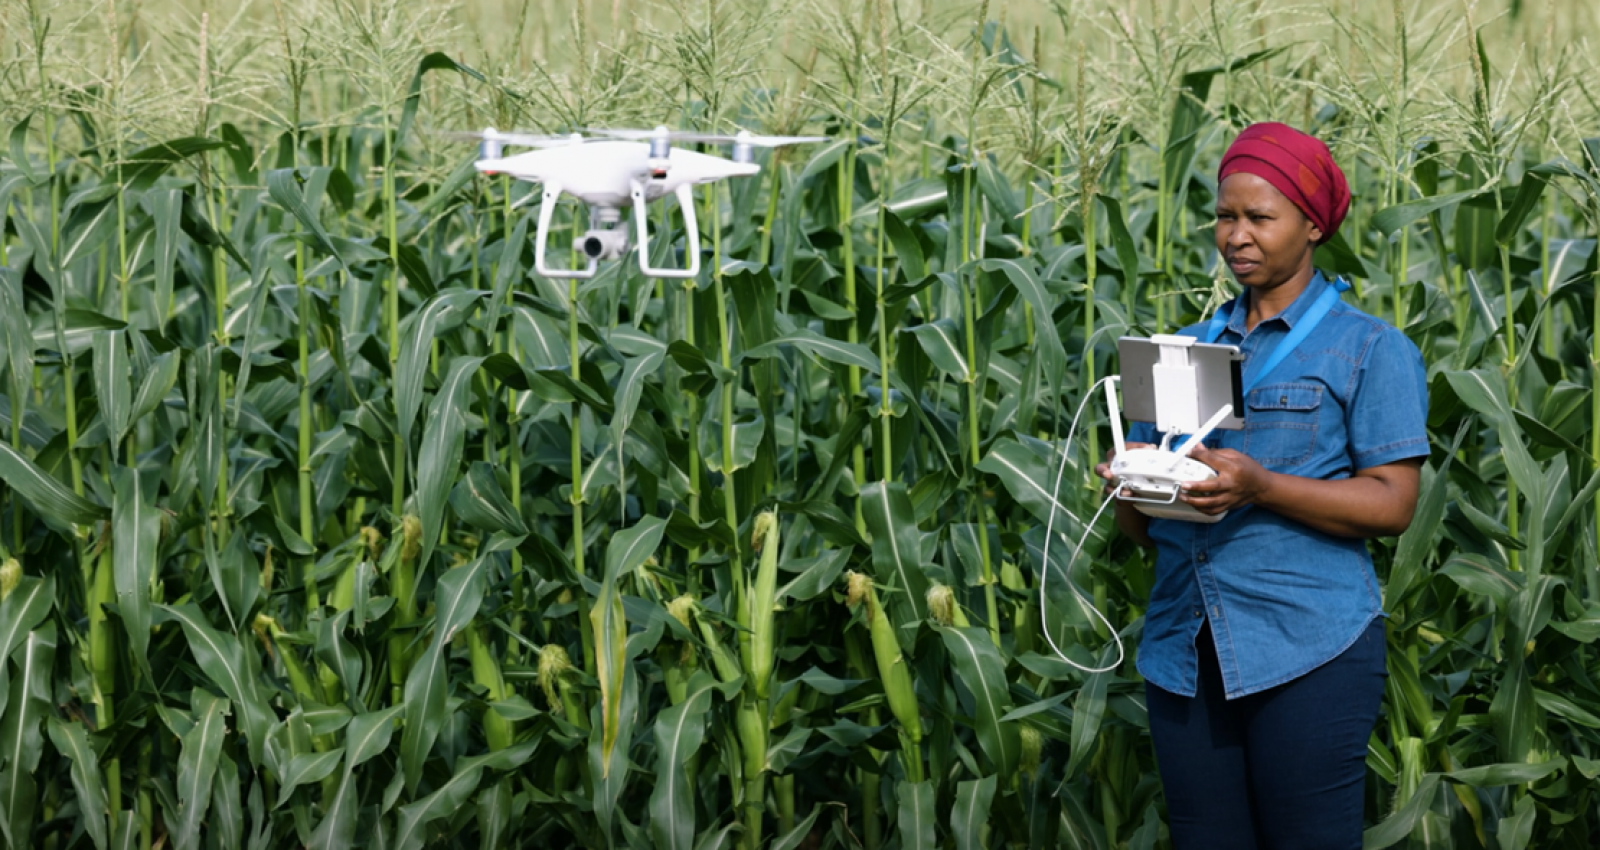 An African agronomist is using a drone to monitor a corn crop. Image source: Shutterstock/Martin Harvey